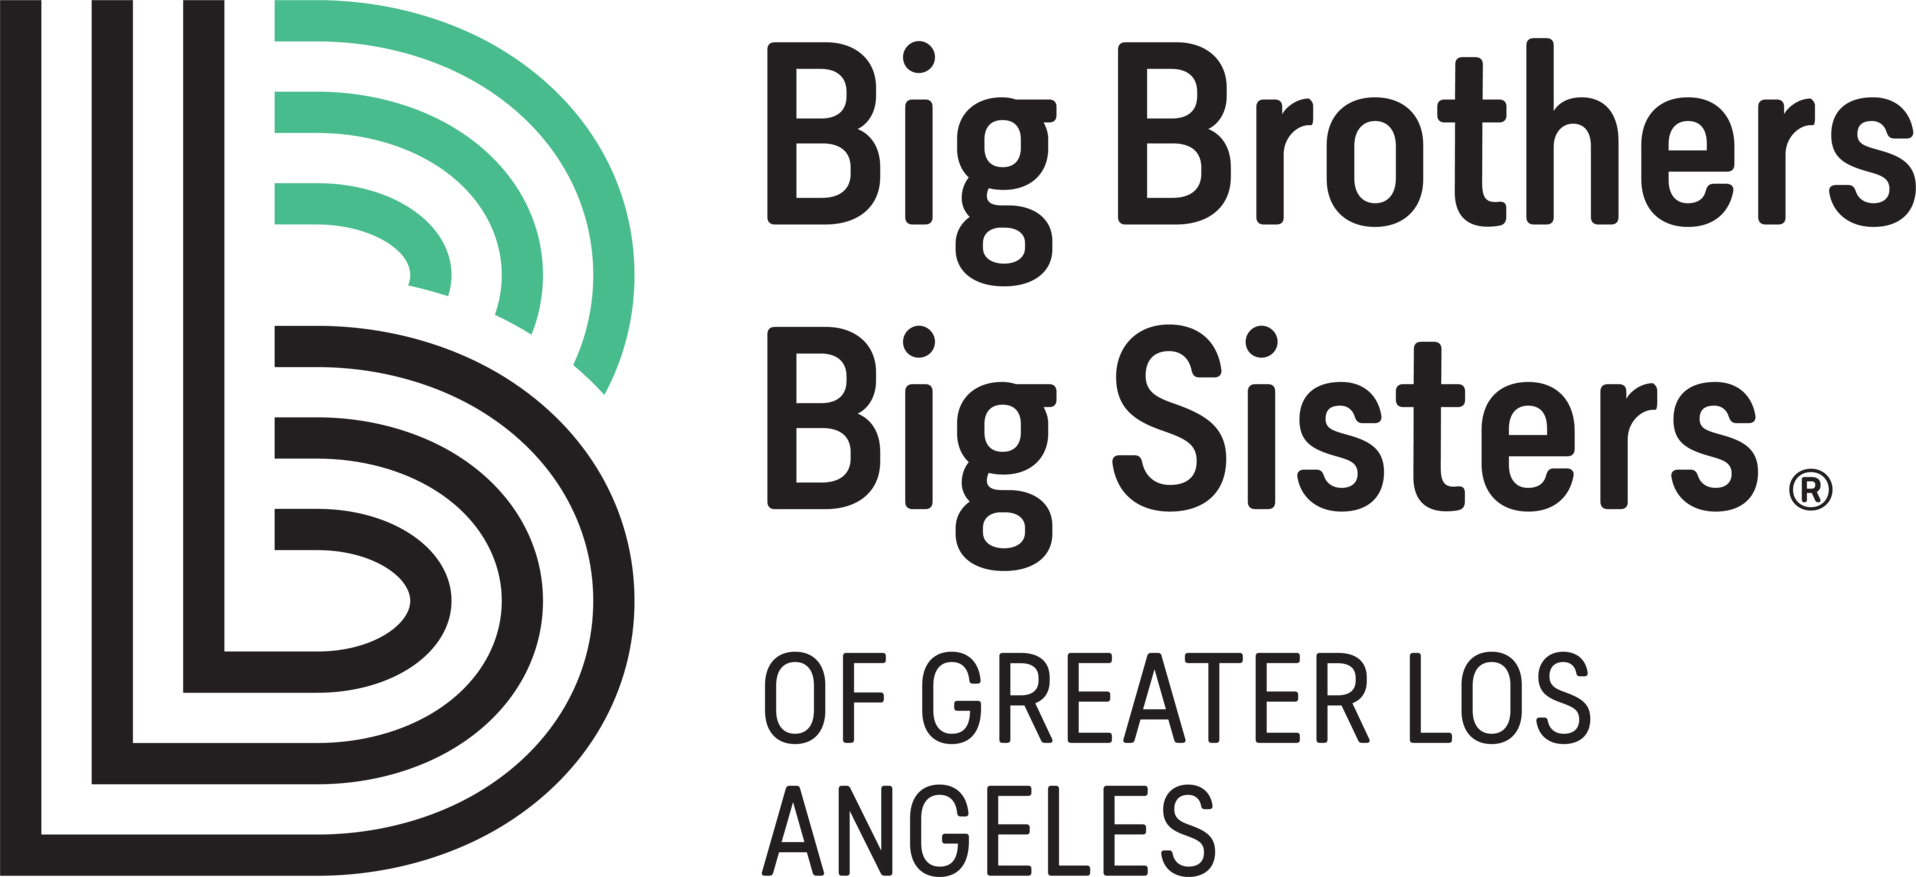 Big Brothers Big Sisters of Greater Los Angeles